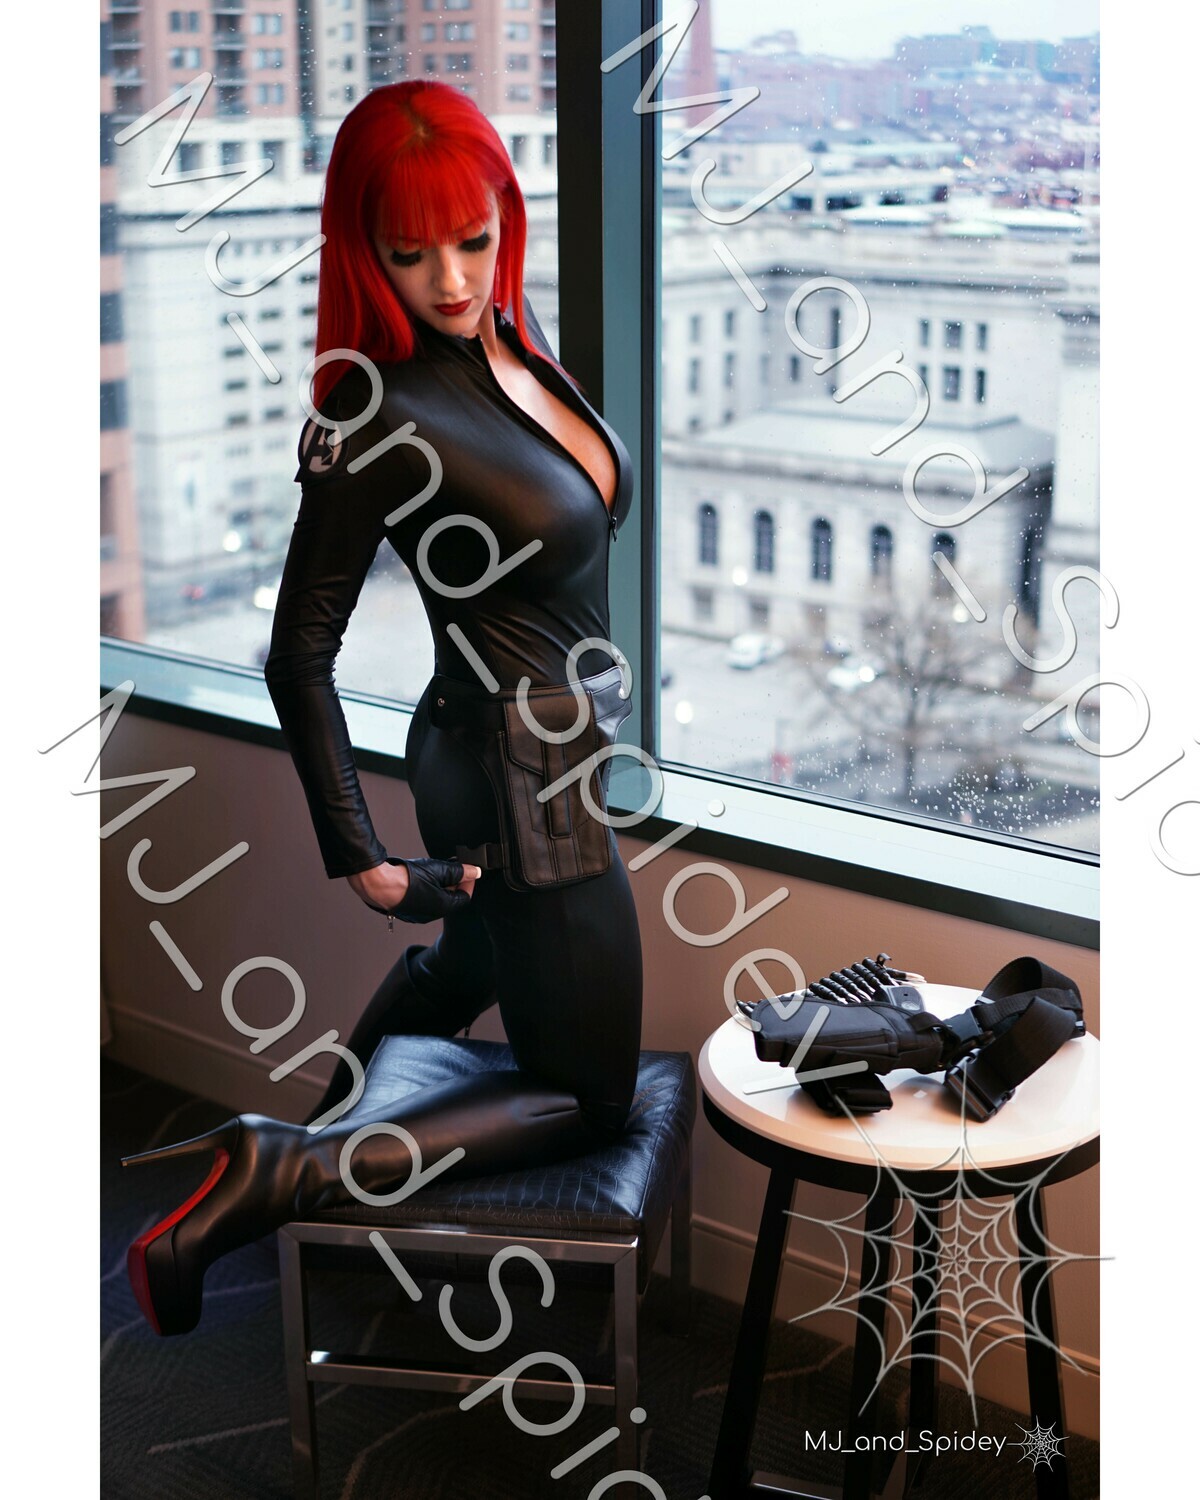 Marvel - Avengers - Black Widow No. 1 - Digital Cosplay Image (@MJ_and_Spidey, MJ and Spidey, Comics)